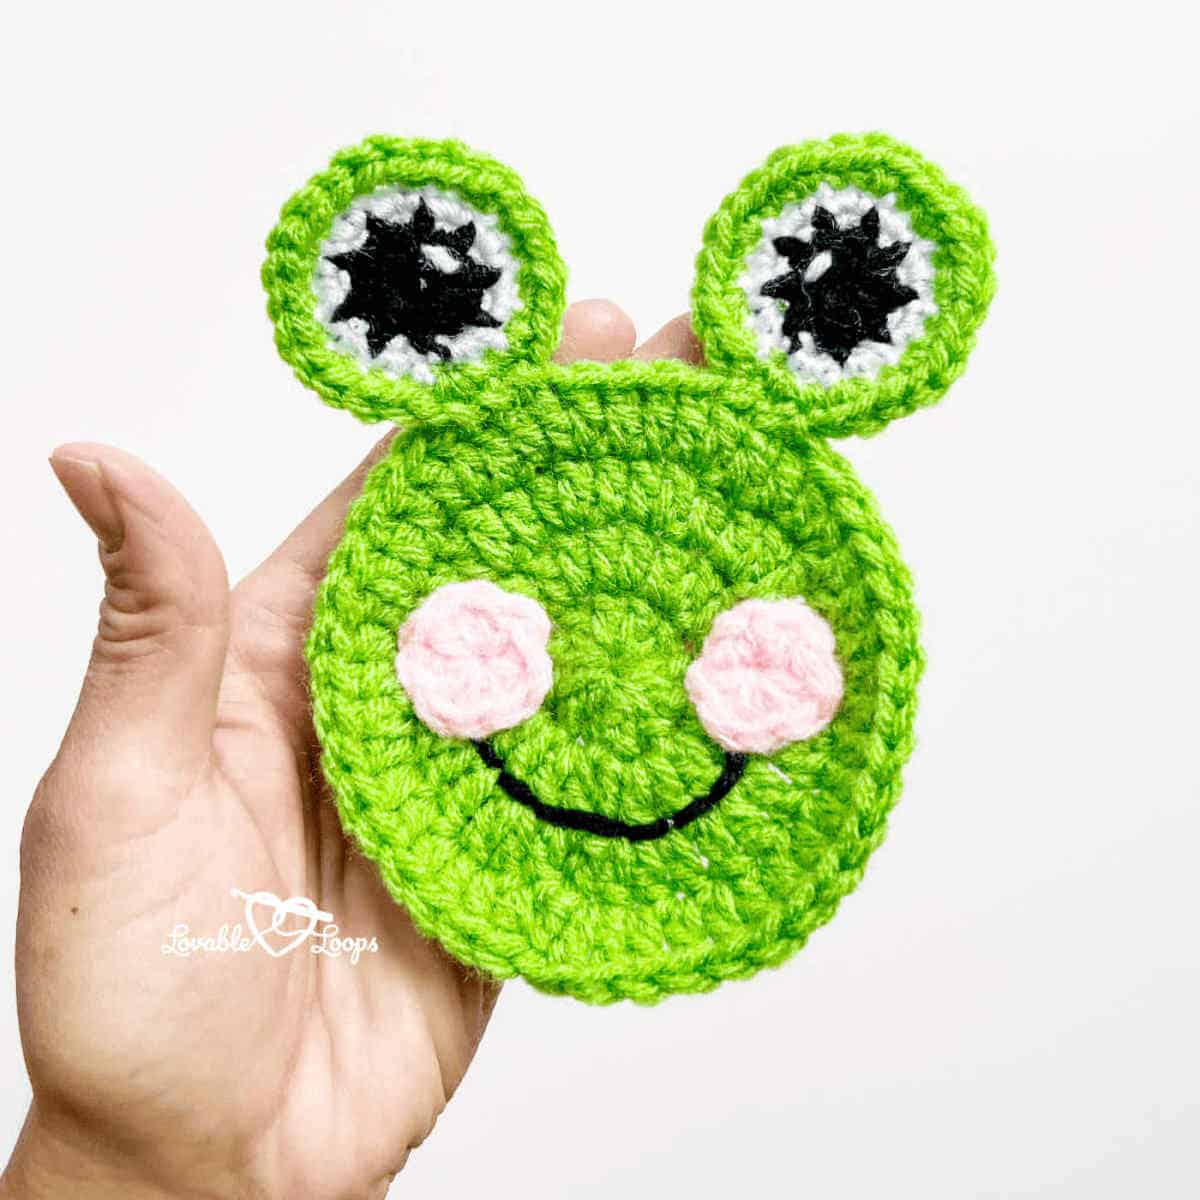 Crocheted frog applique in the palm of a hand.